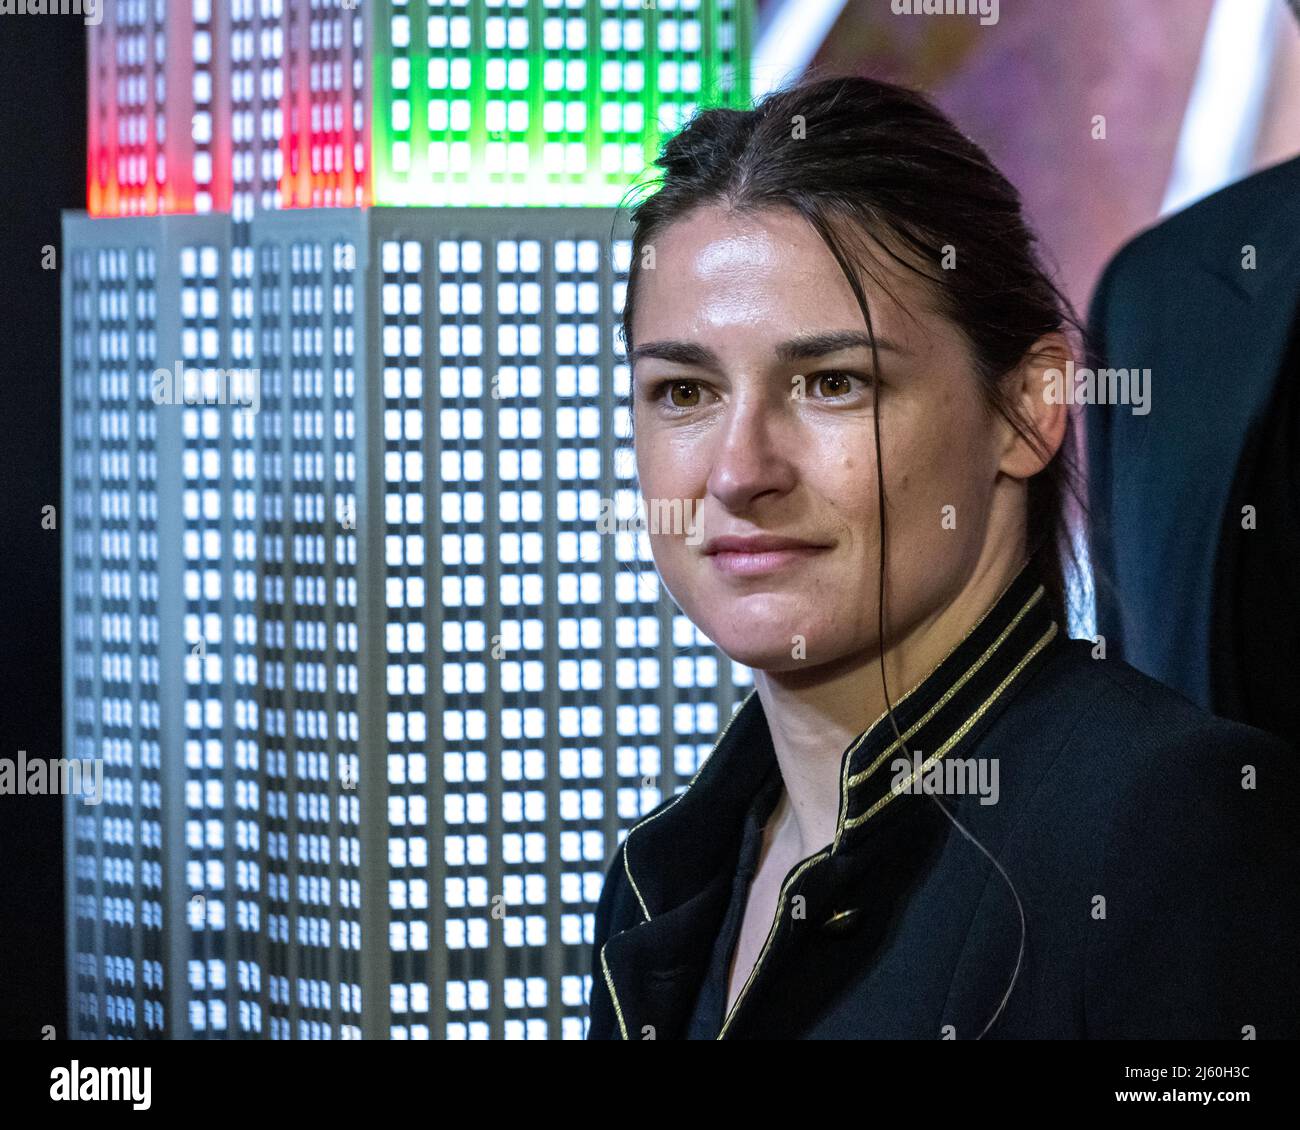 New York, USA. 26th Apr, 2022. Undisputed World Lightweight Champion Katie Taylor of Ireland poses during a promotional event at the Empire State building. Taylor and and Seven-division World Champion Amanda Serrano of Puerto Rico, the top two female boxers in the world, turned on the lights of the iconic New York City landmark with the colors of Ireland and Puerto Rico ahead of their history-making fight at the Madison Square Garden for the undisputed World Lightweight Title on Saturday. Credit: Enrique Shore/Alamy Live News Stock Photo